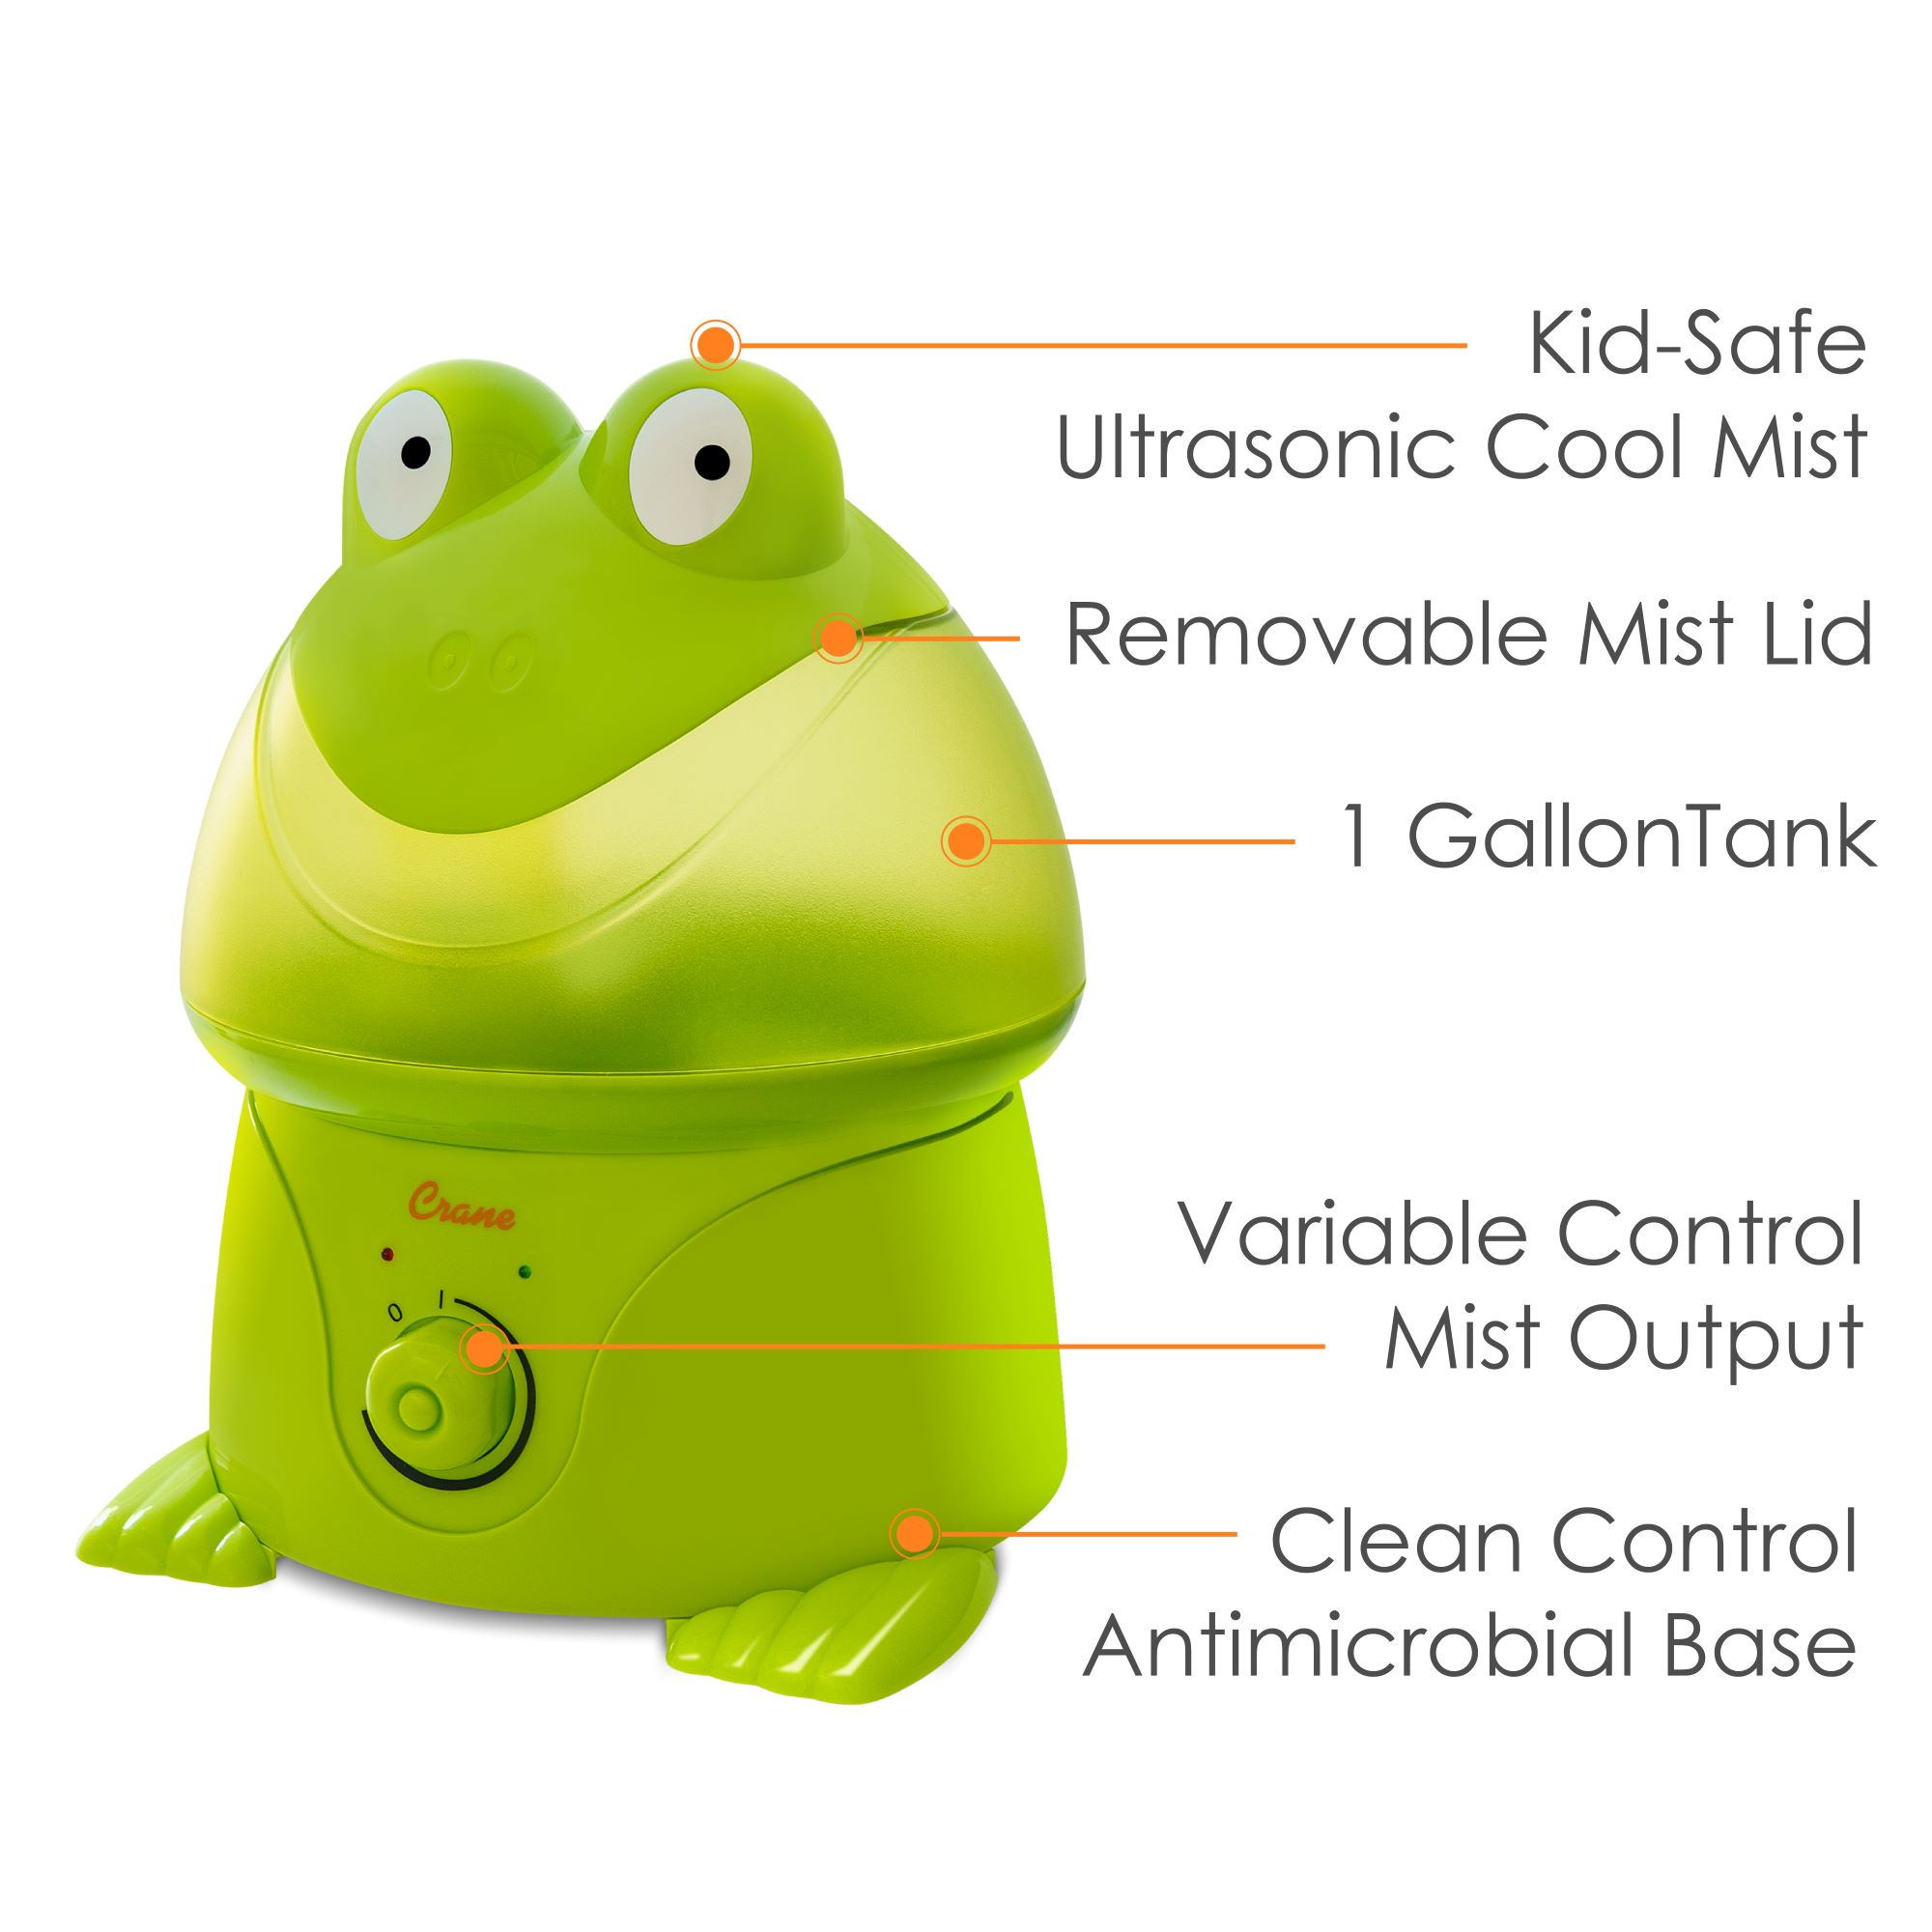 Crane USA Adorable Ultrasonic Cool Mist Humidifier, 1 Gallon, 500 Sq Ft Coverage, 24 Hour Run Time - Frog - image 3 of 7